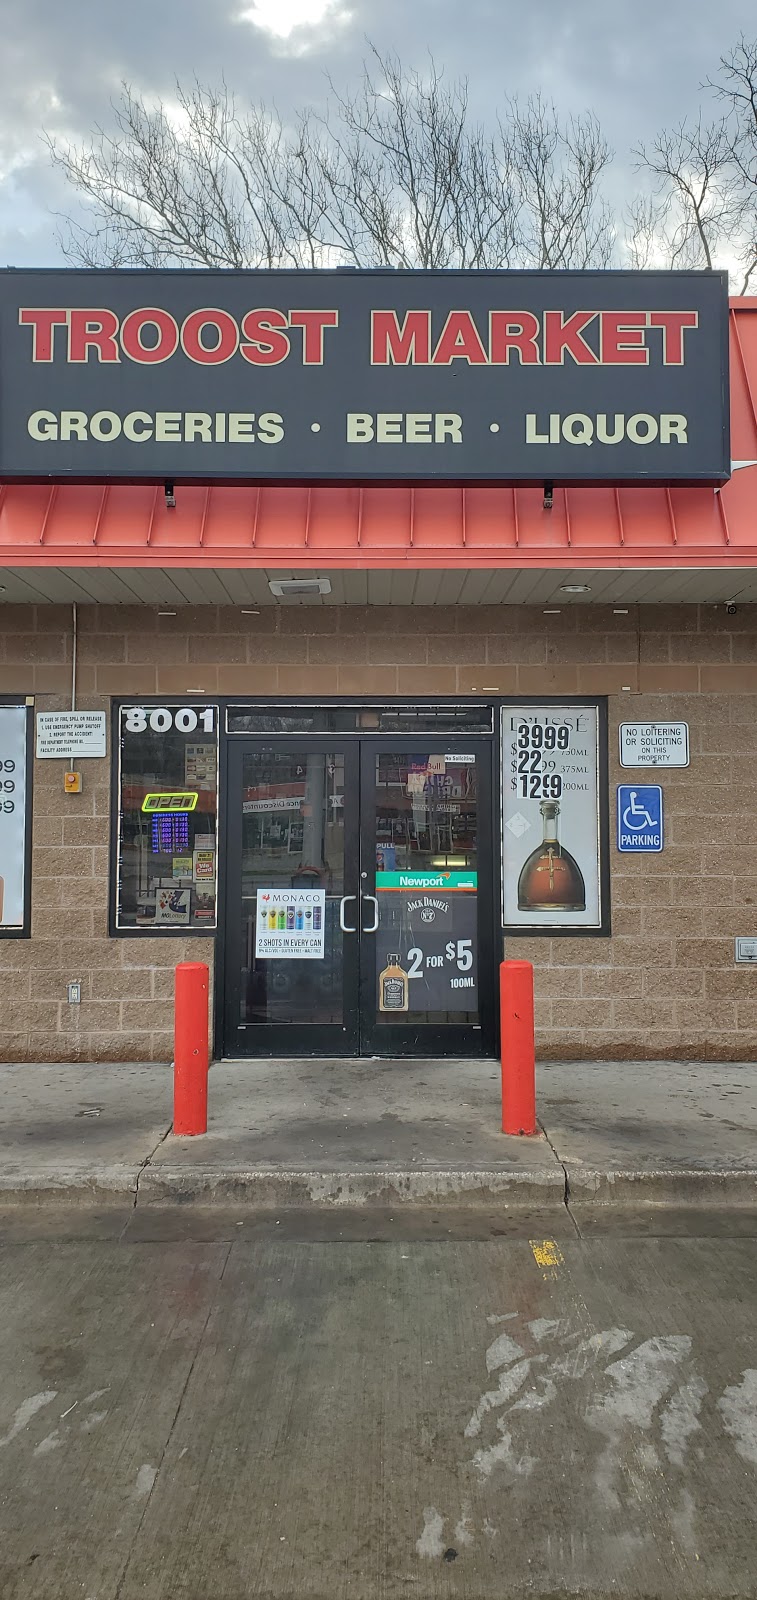 Troost Market | 8001 Troost Ave, Kansas City, MO 64131 | Phone: (816) 363-4943